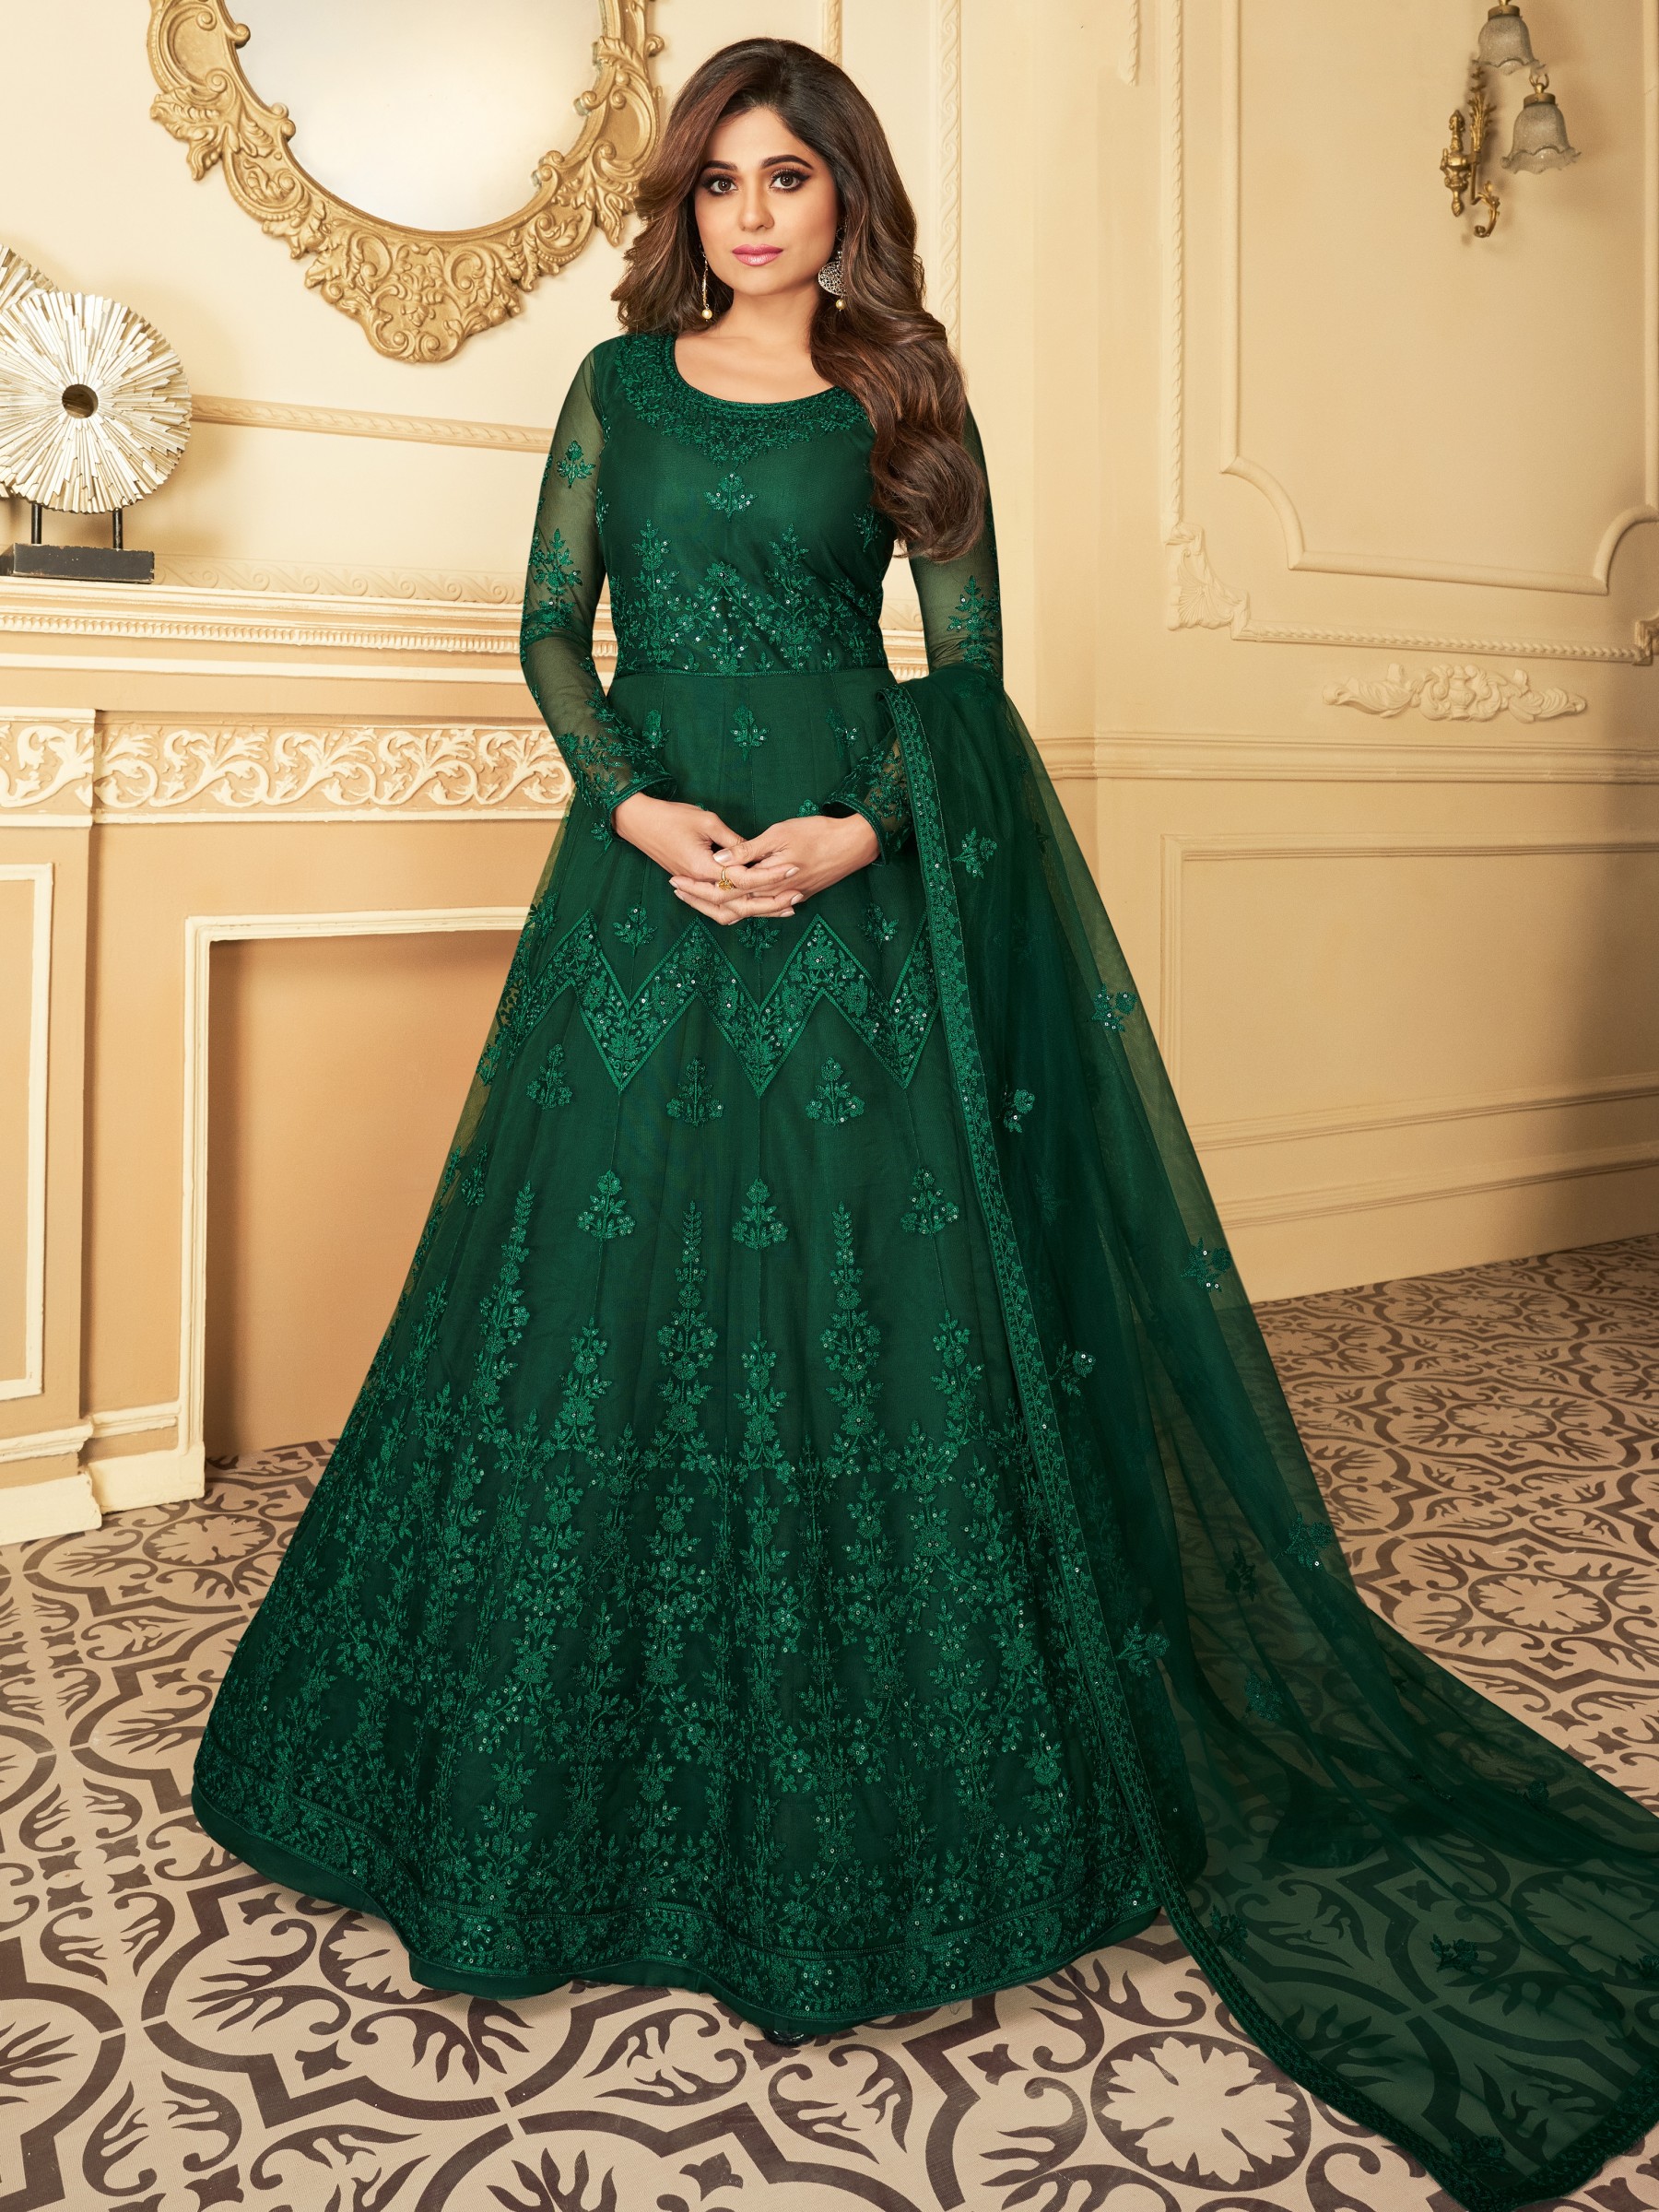 Butterfly net Fabrics Party Wear  Readymade Gown In Green Color With Embroidery Work